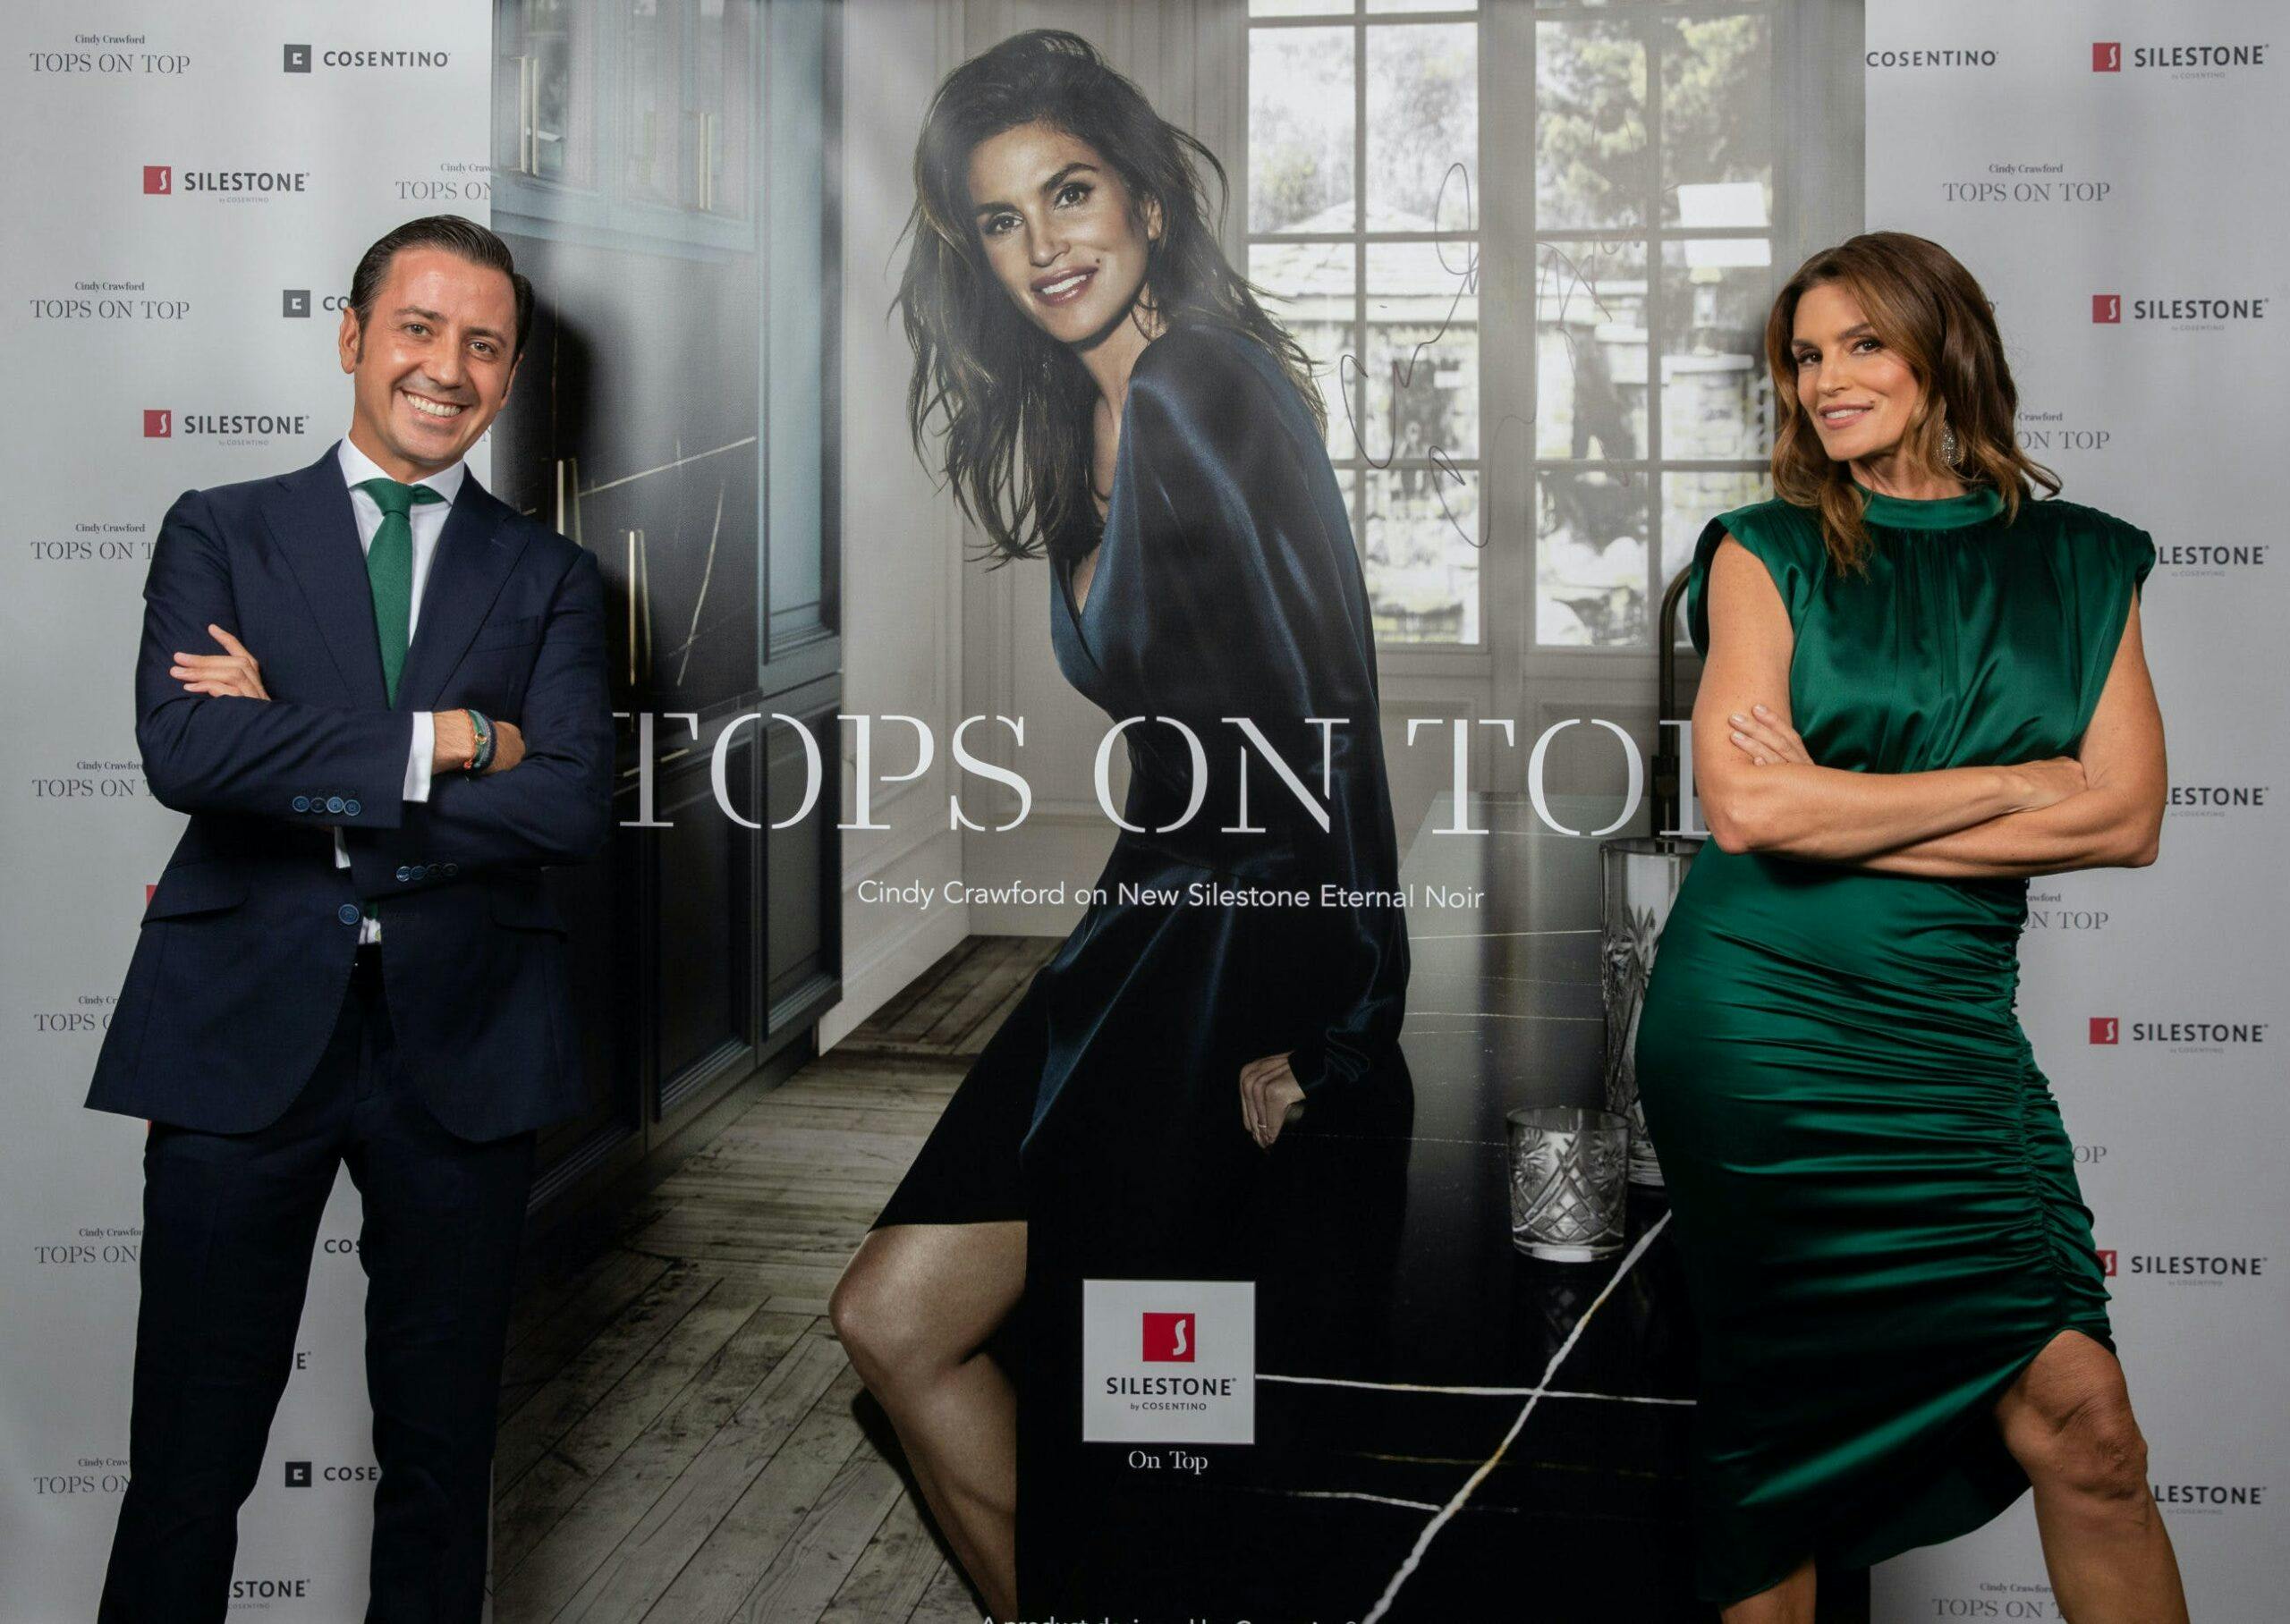 Image 32 of Eduardo Cosentino y Cindy Crawford Tops On Top 2019 Londres 3 scaled in Silestone® Presents its New "Tops on Top 2019" Campaign Featuring Cindy Crawford - Cosentino